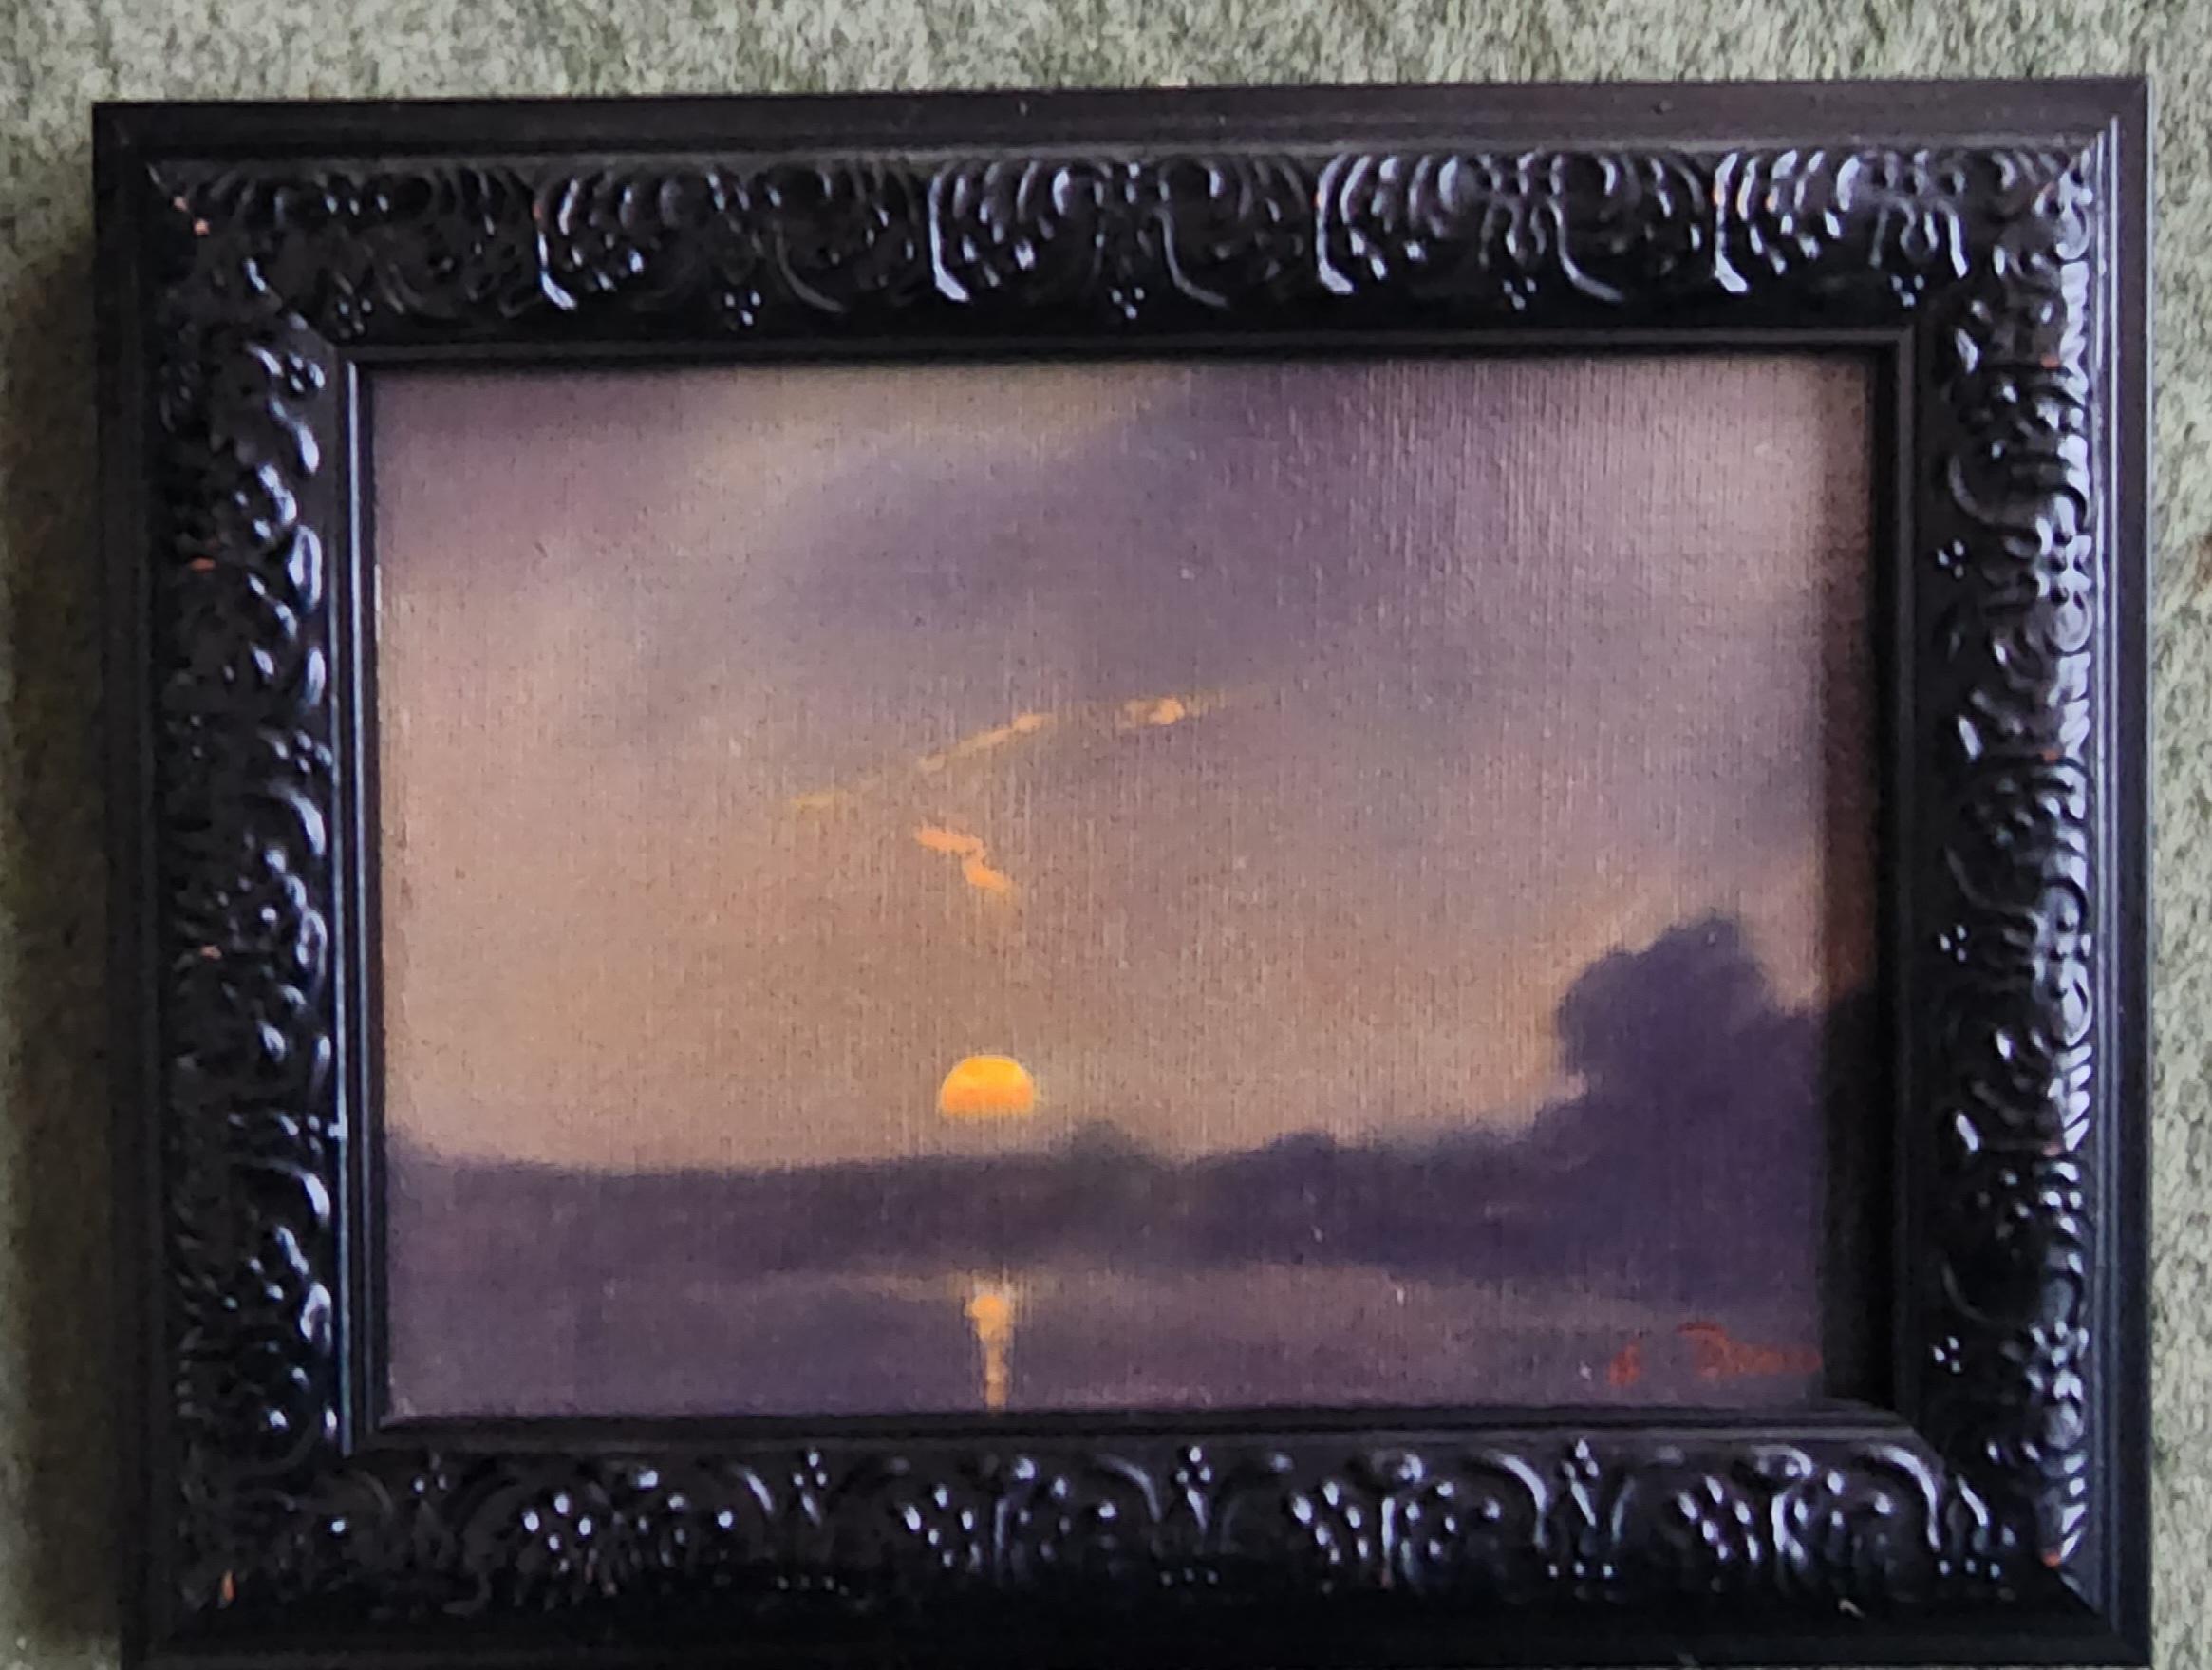 Sunset Sketch #6 - Painting by William R. Davis